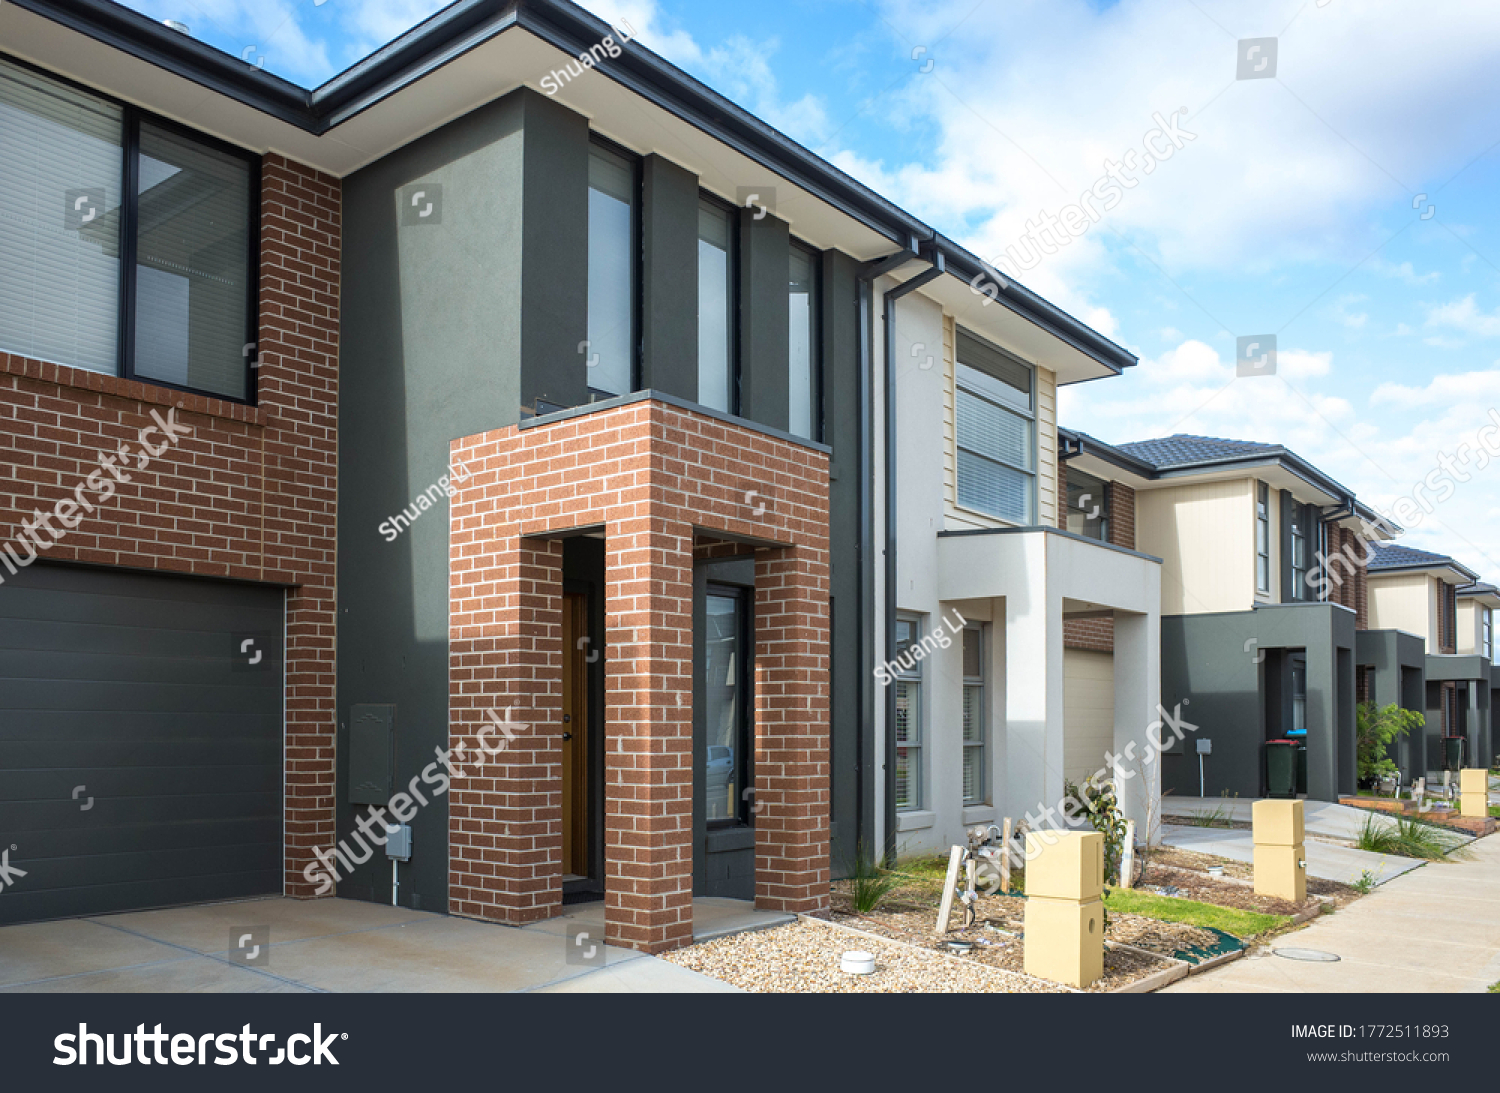 Building of some residential townhouses in a suburb of Australia. The exteriors of some two-story modern Australian suburban homes.  #1772511893